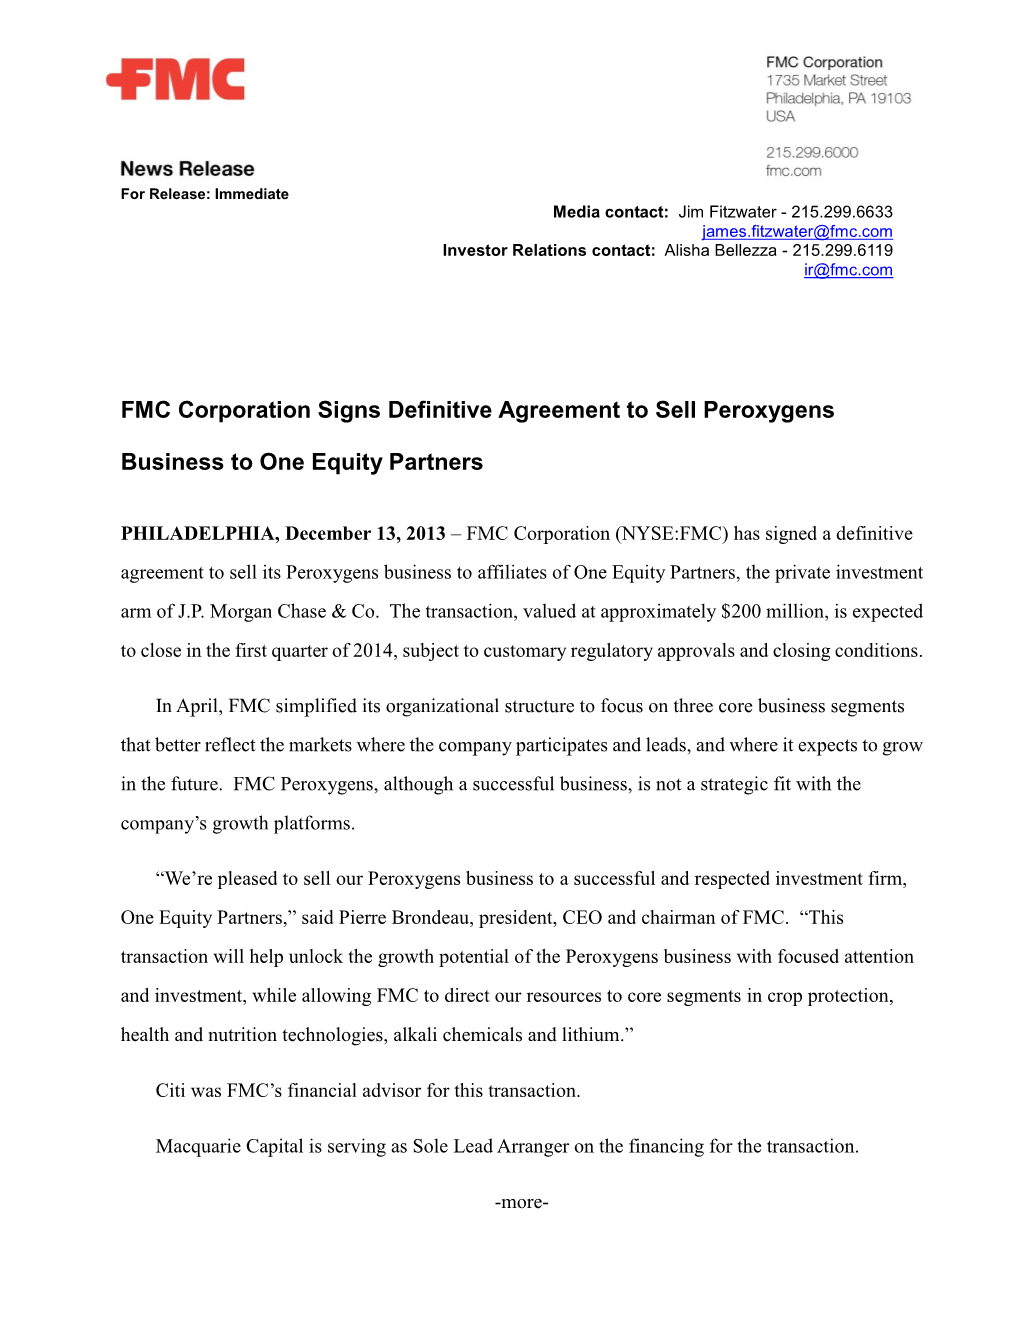 FMC Corporation Signs Definitive Agreement to Sell Peroxygens